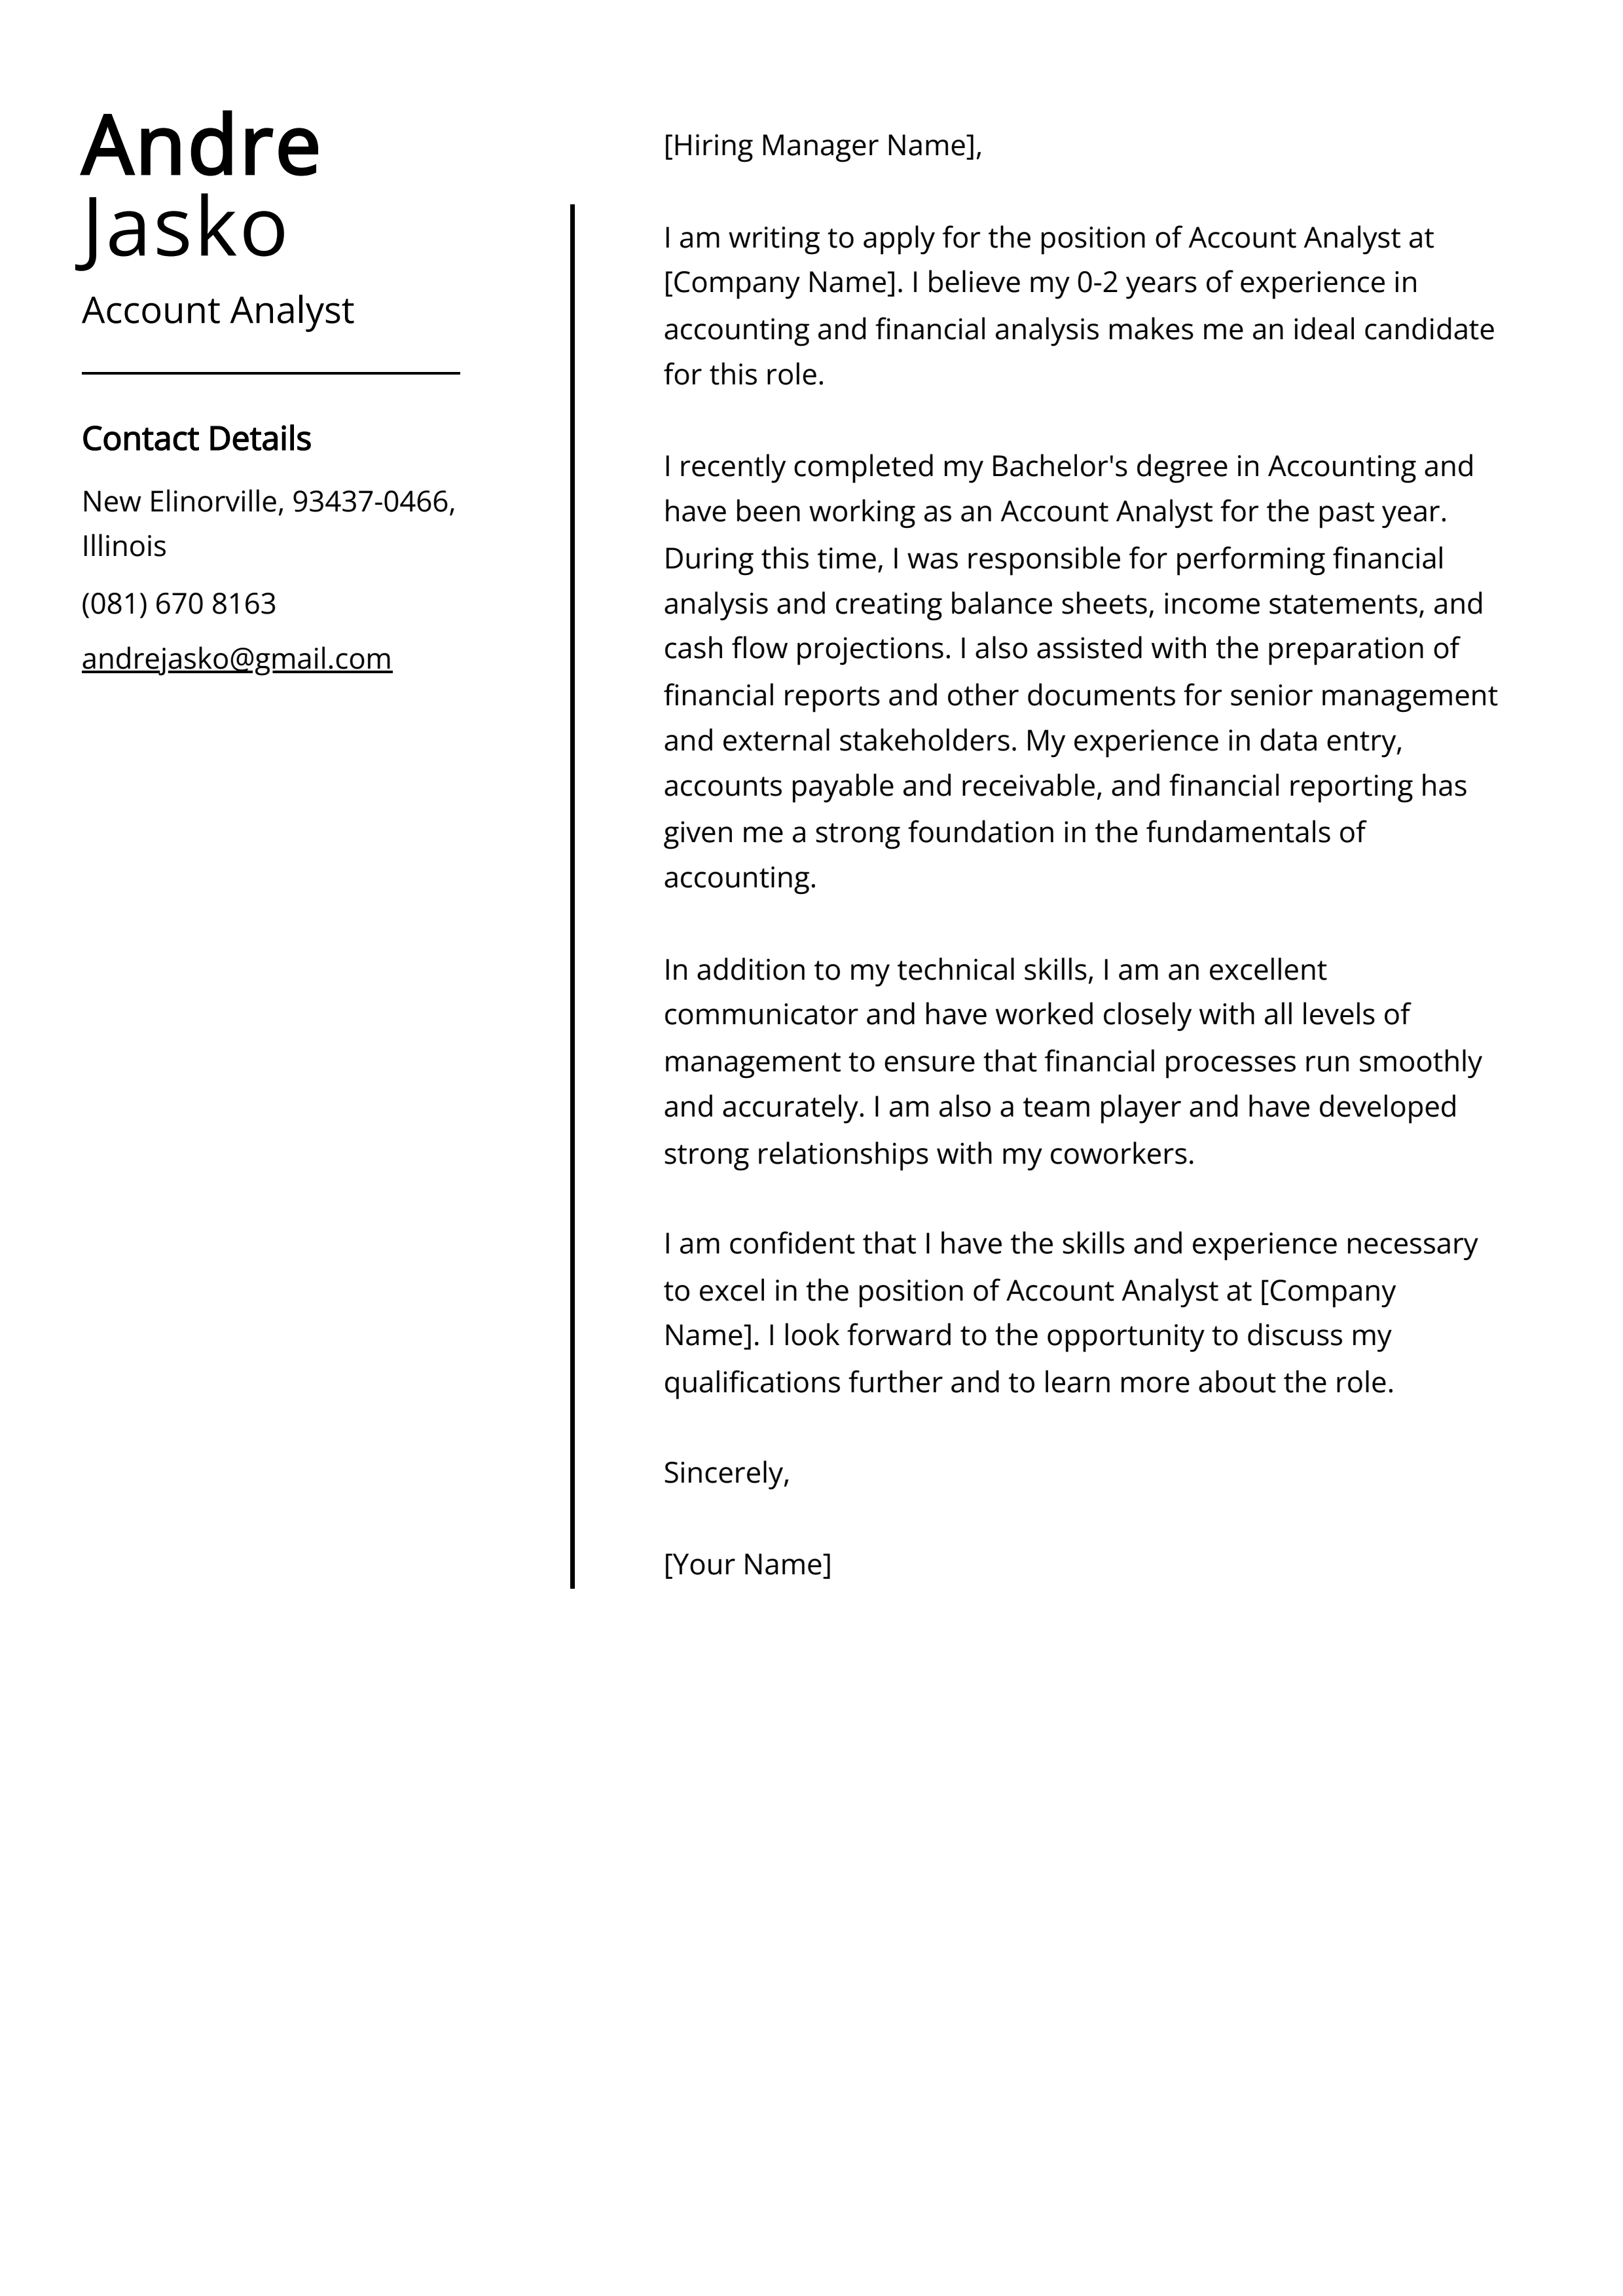 Account Analyst Cover Letter Example